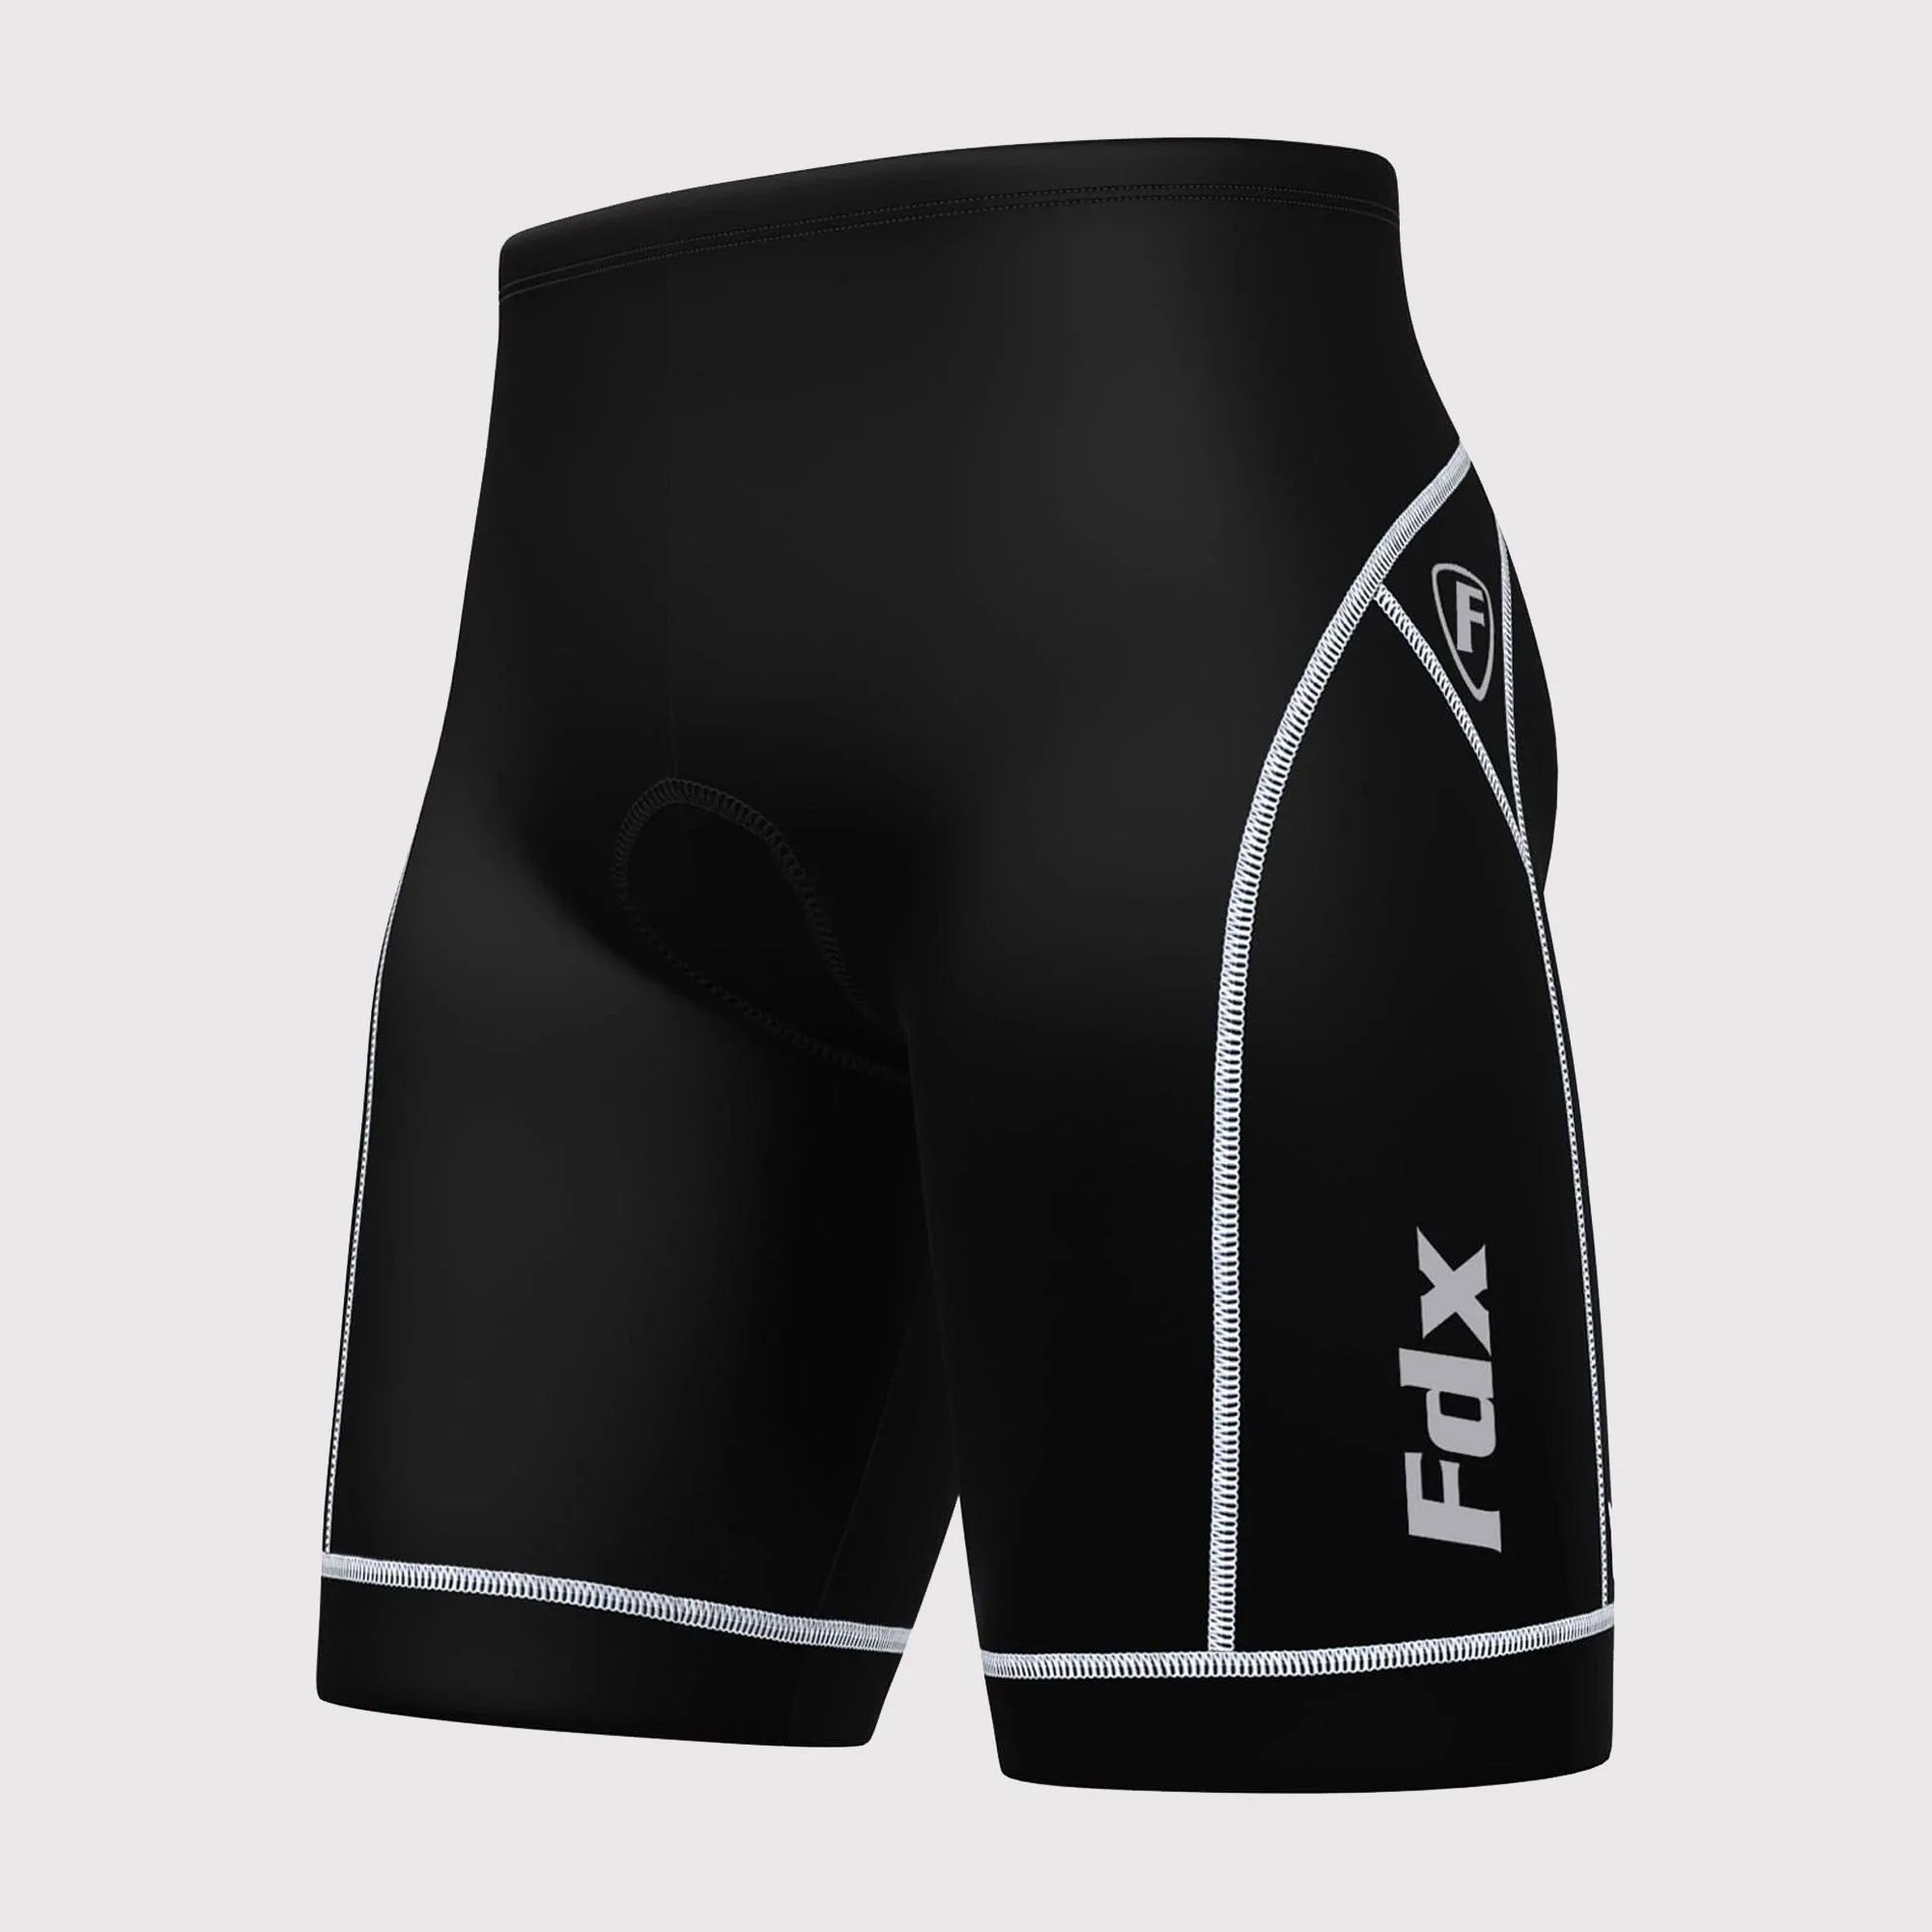 Fdx Ridest White Men's Padded Summer Cycling Shorts